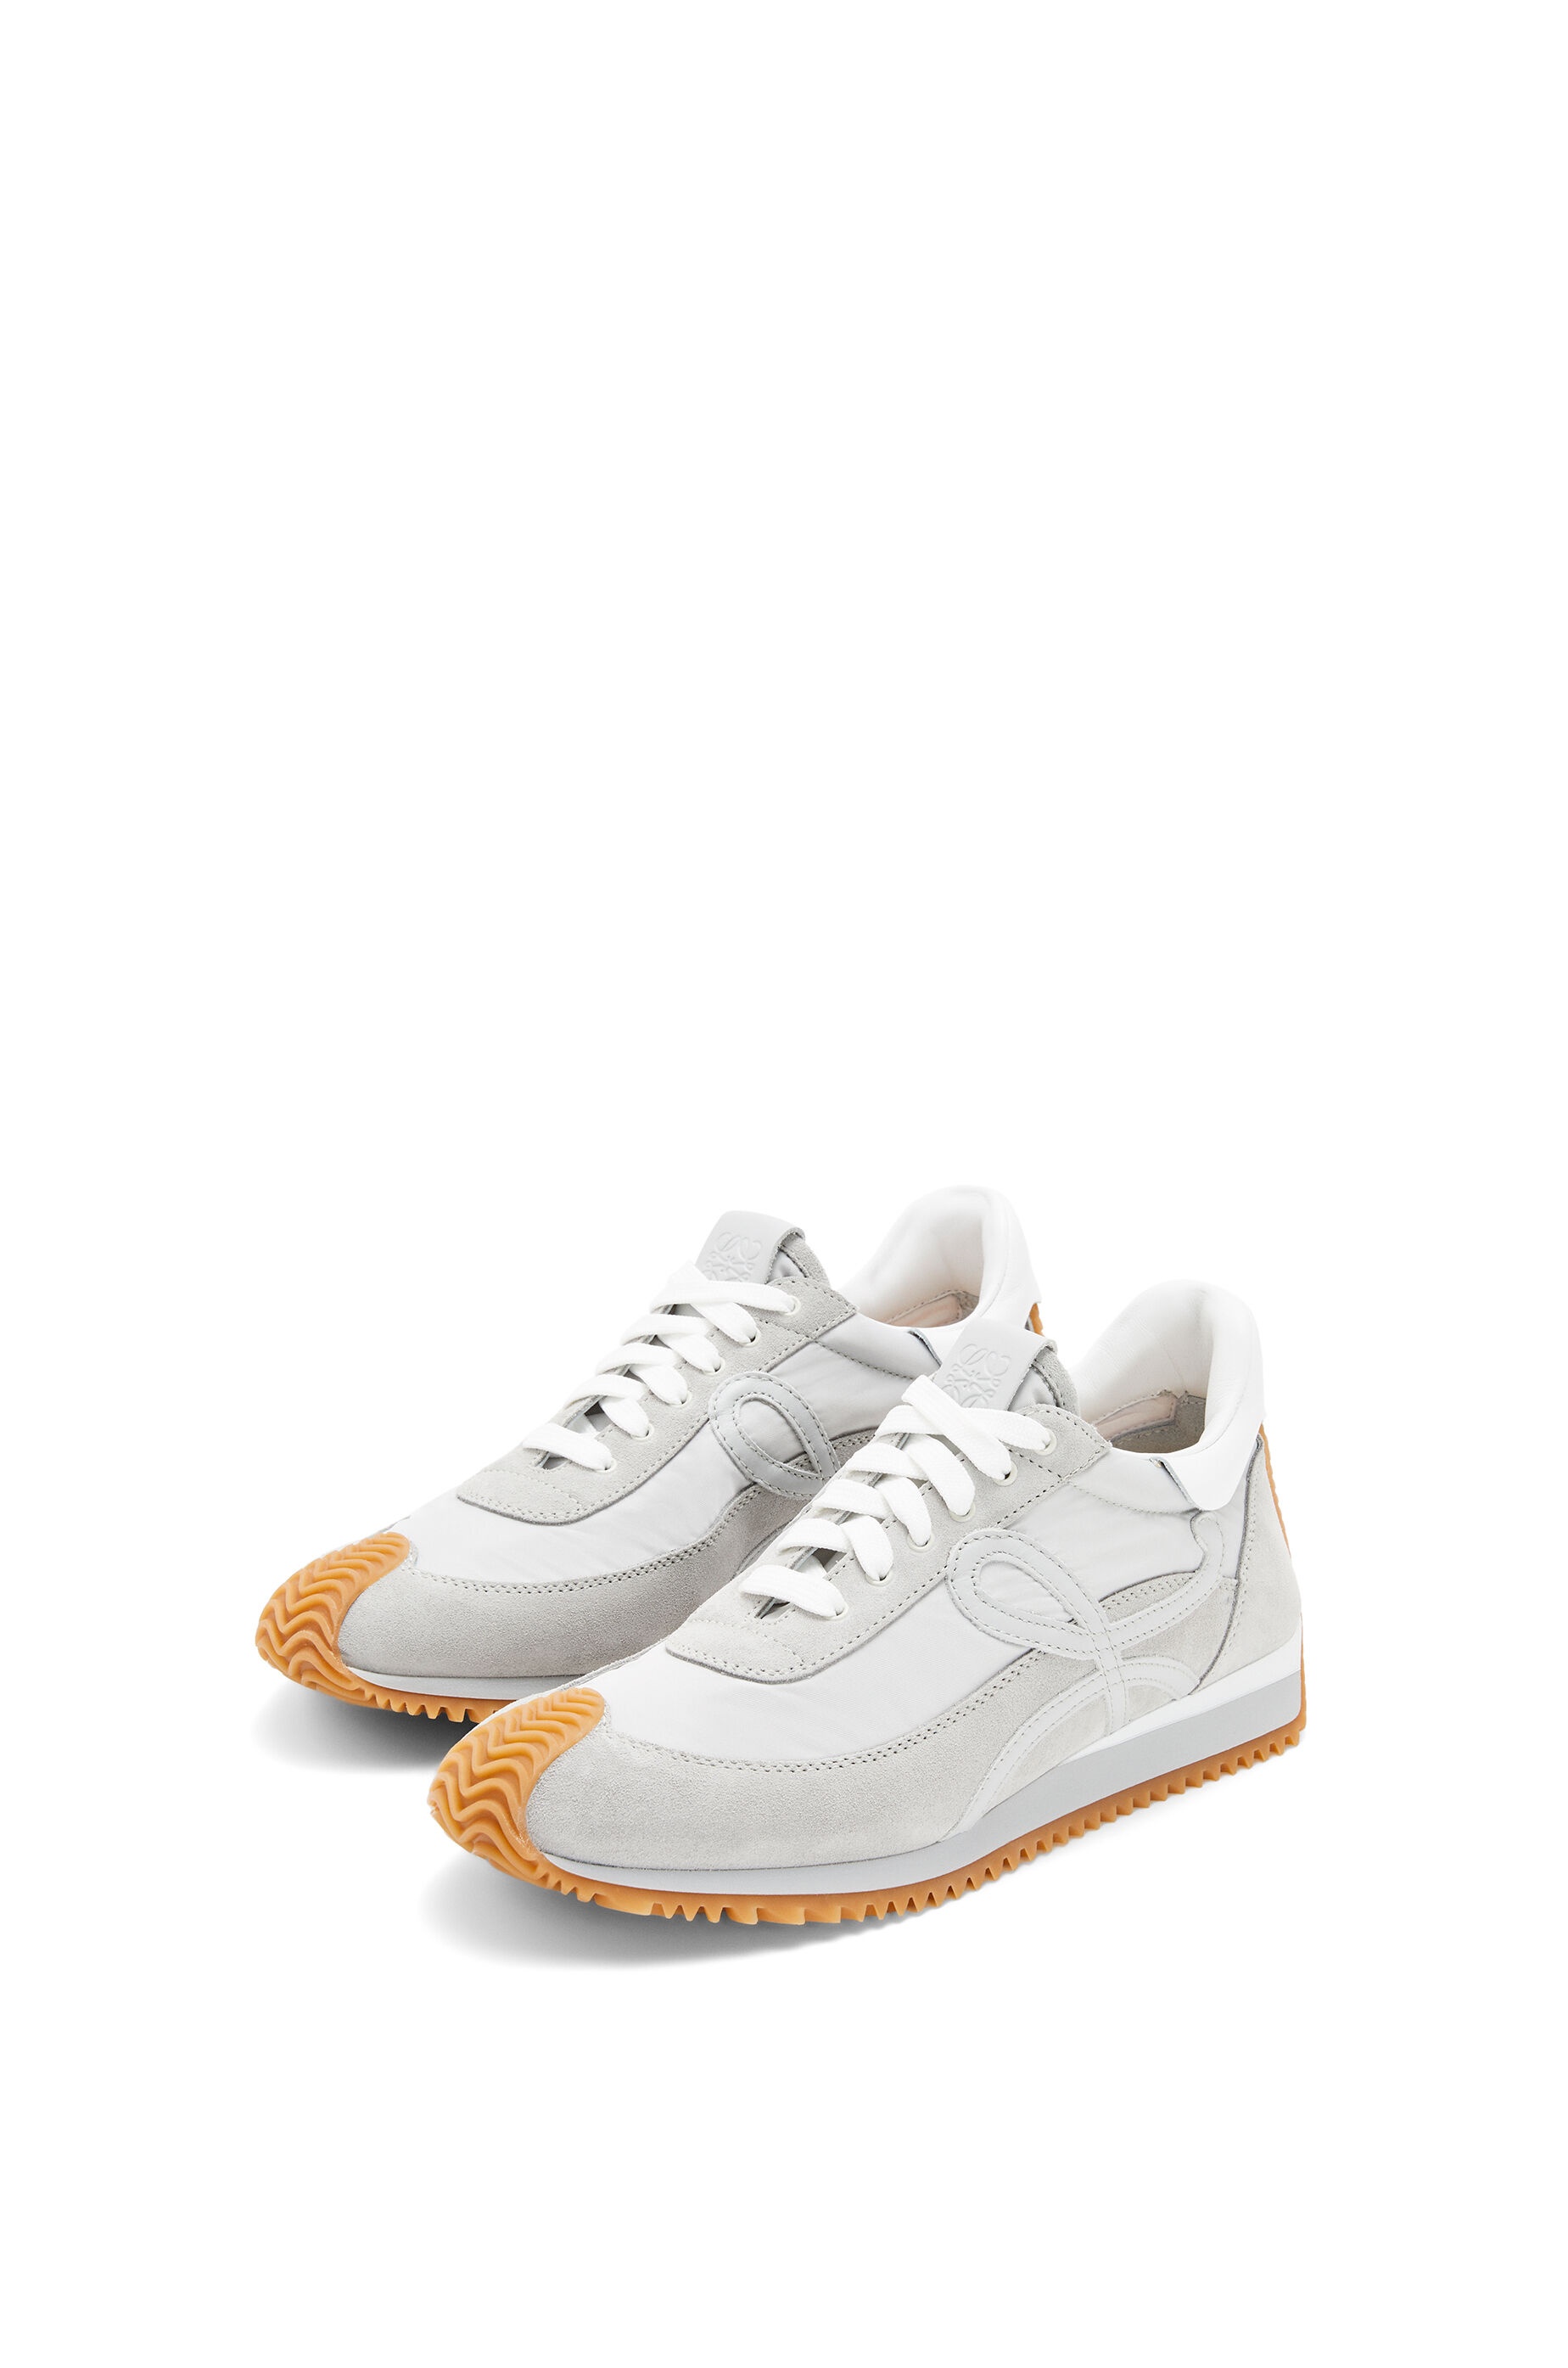 Flow Runner in nylon and suede - 2